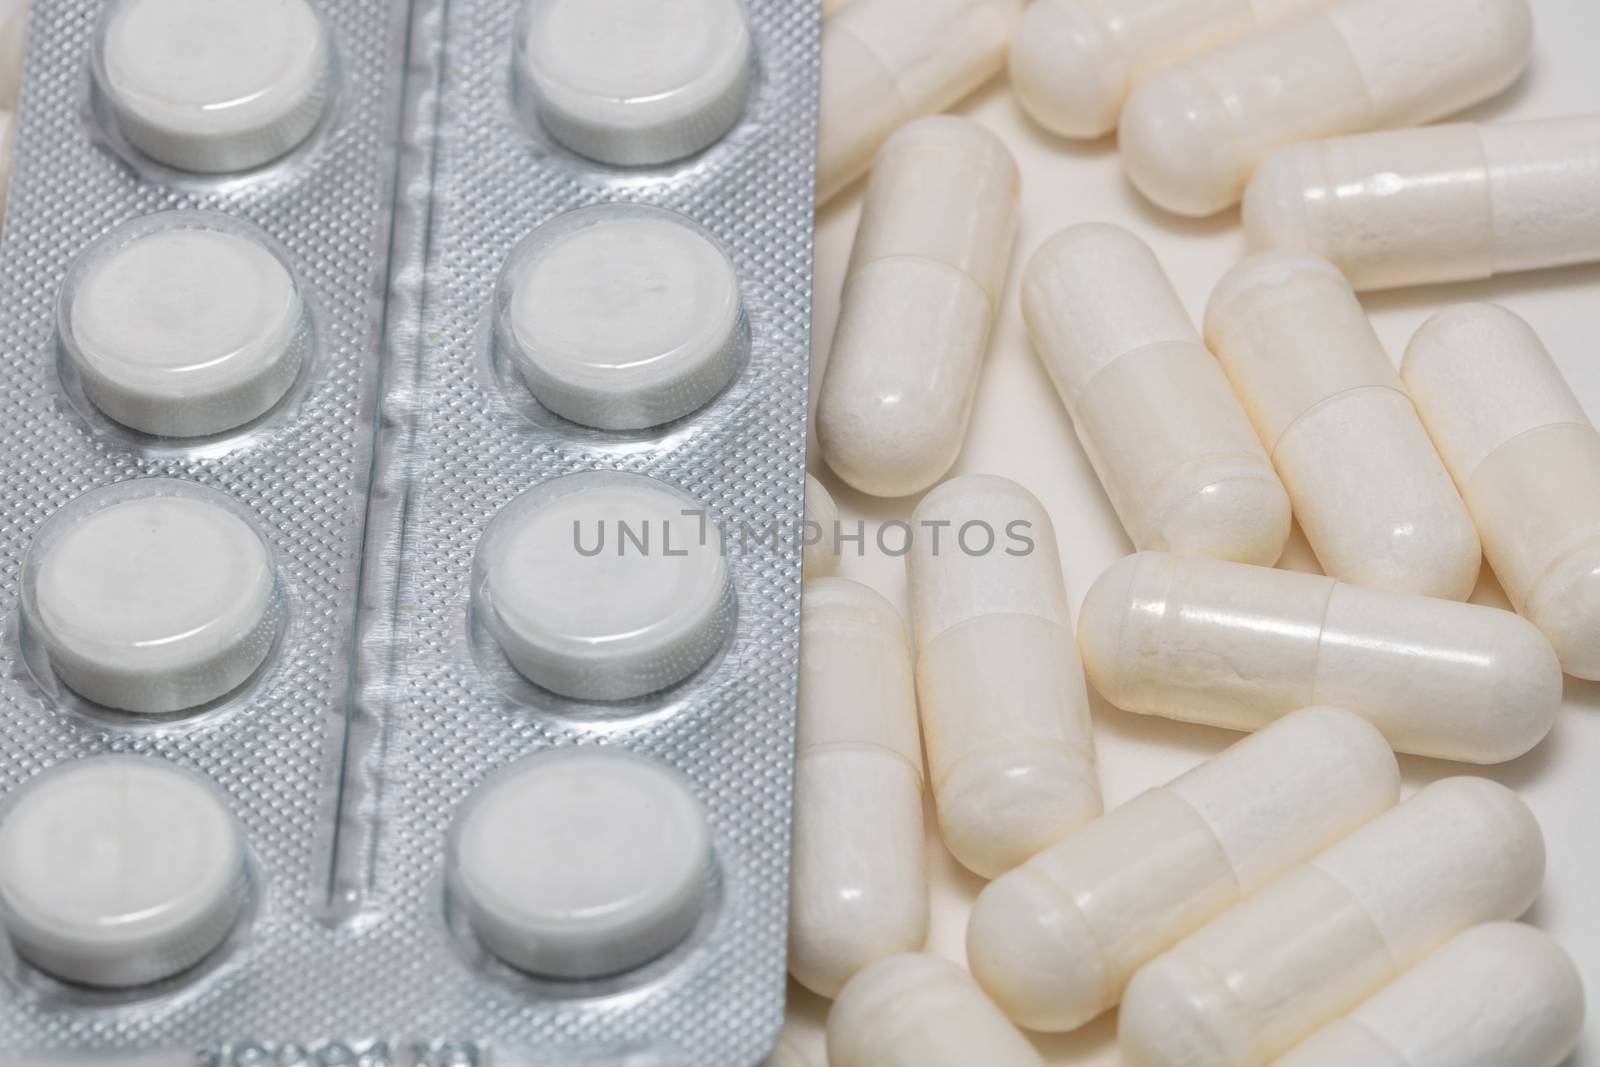 High angle close up shot of various white pills on white background. Some of them are out of focus. Pharmaceutical business and medicine sale concepts.